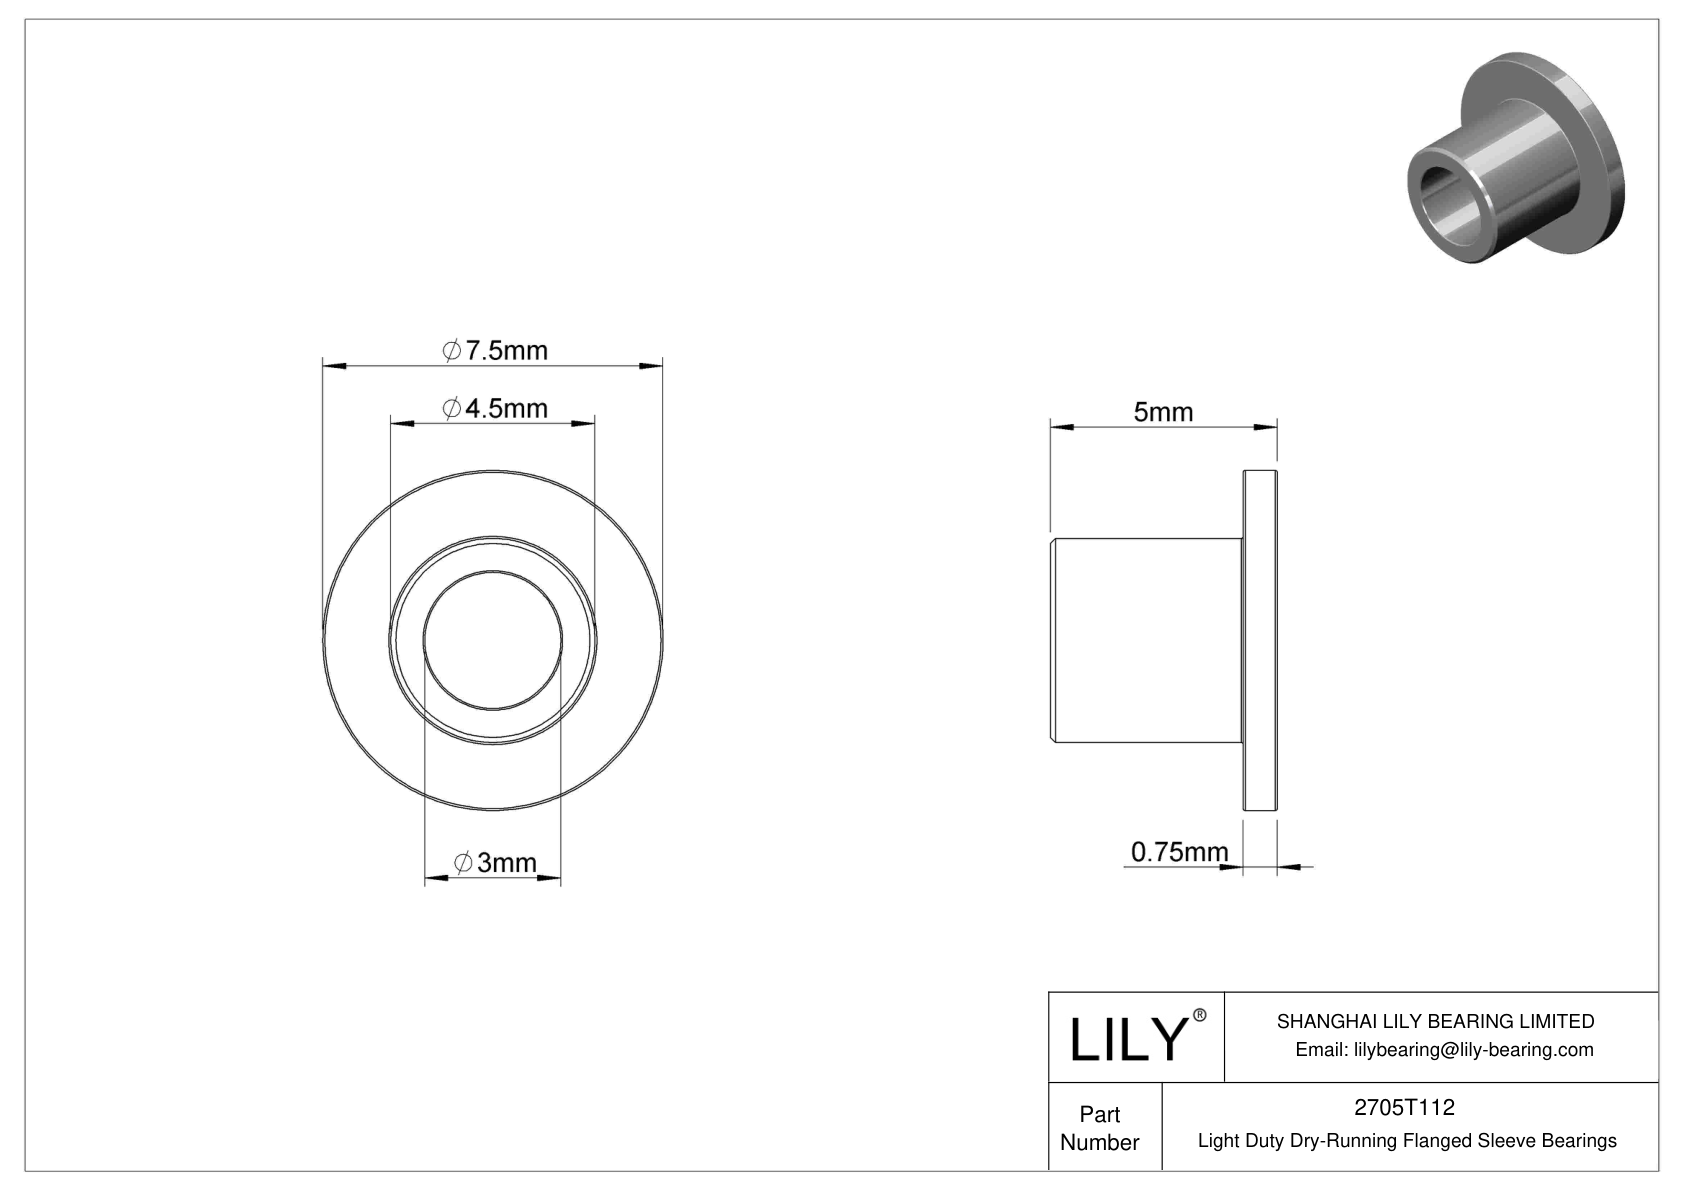 CHAFTBBC Light Duty Dry-Running Flanged Sleeve Bearings cad drawing